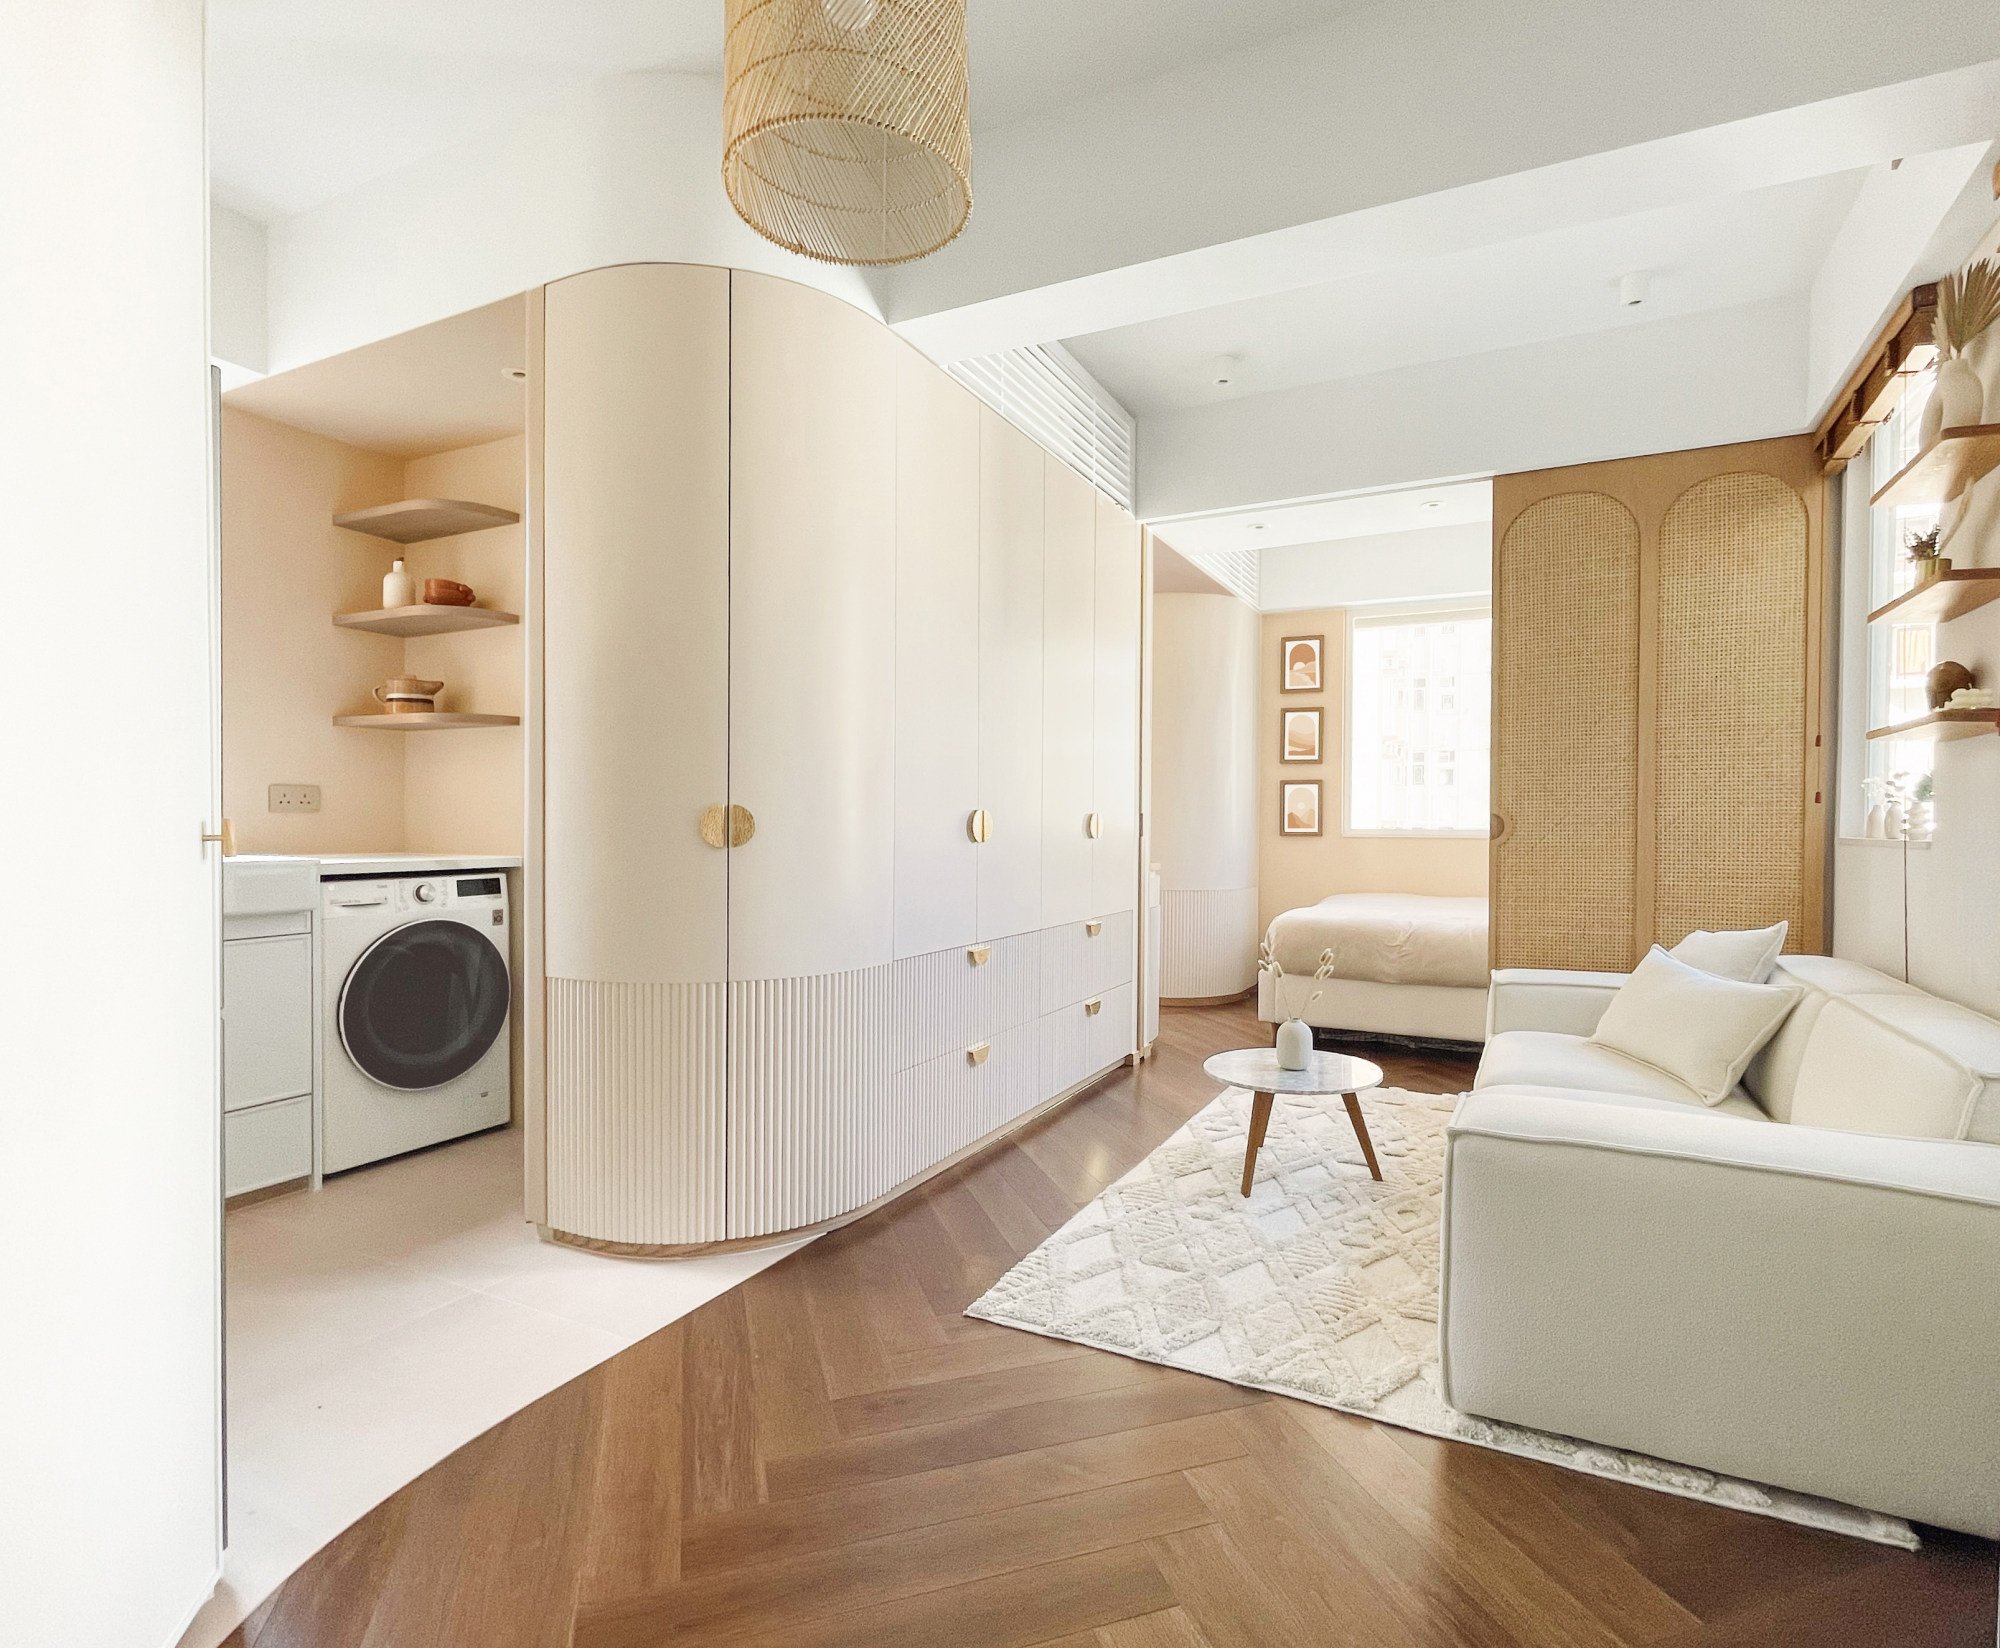 a pinterest-driven hong kong micro-apartment with full-sized tub, roomy shower, built-in oven? design duo make it a reality